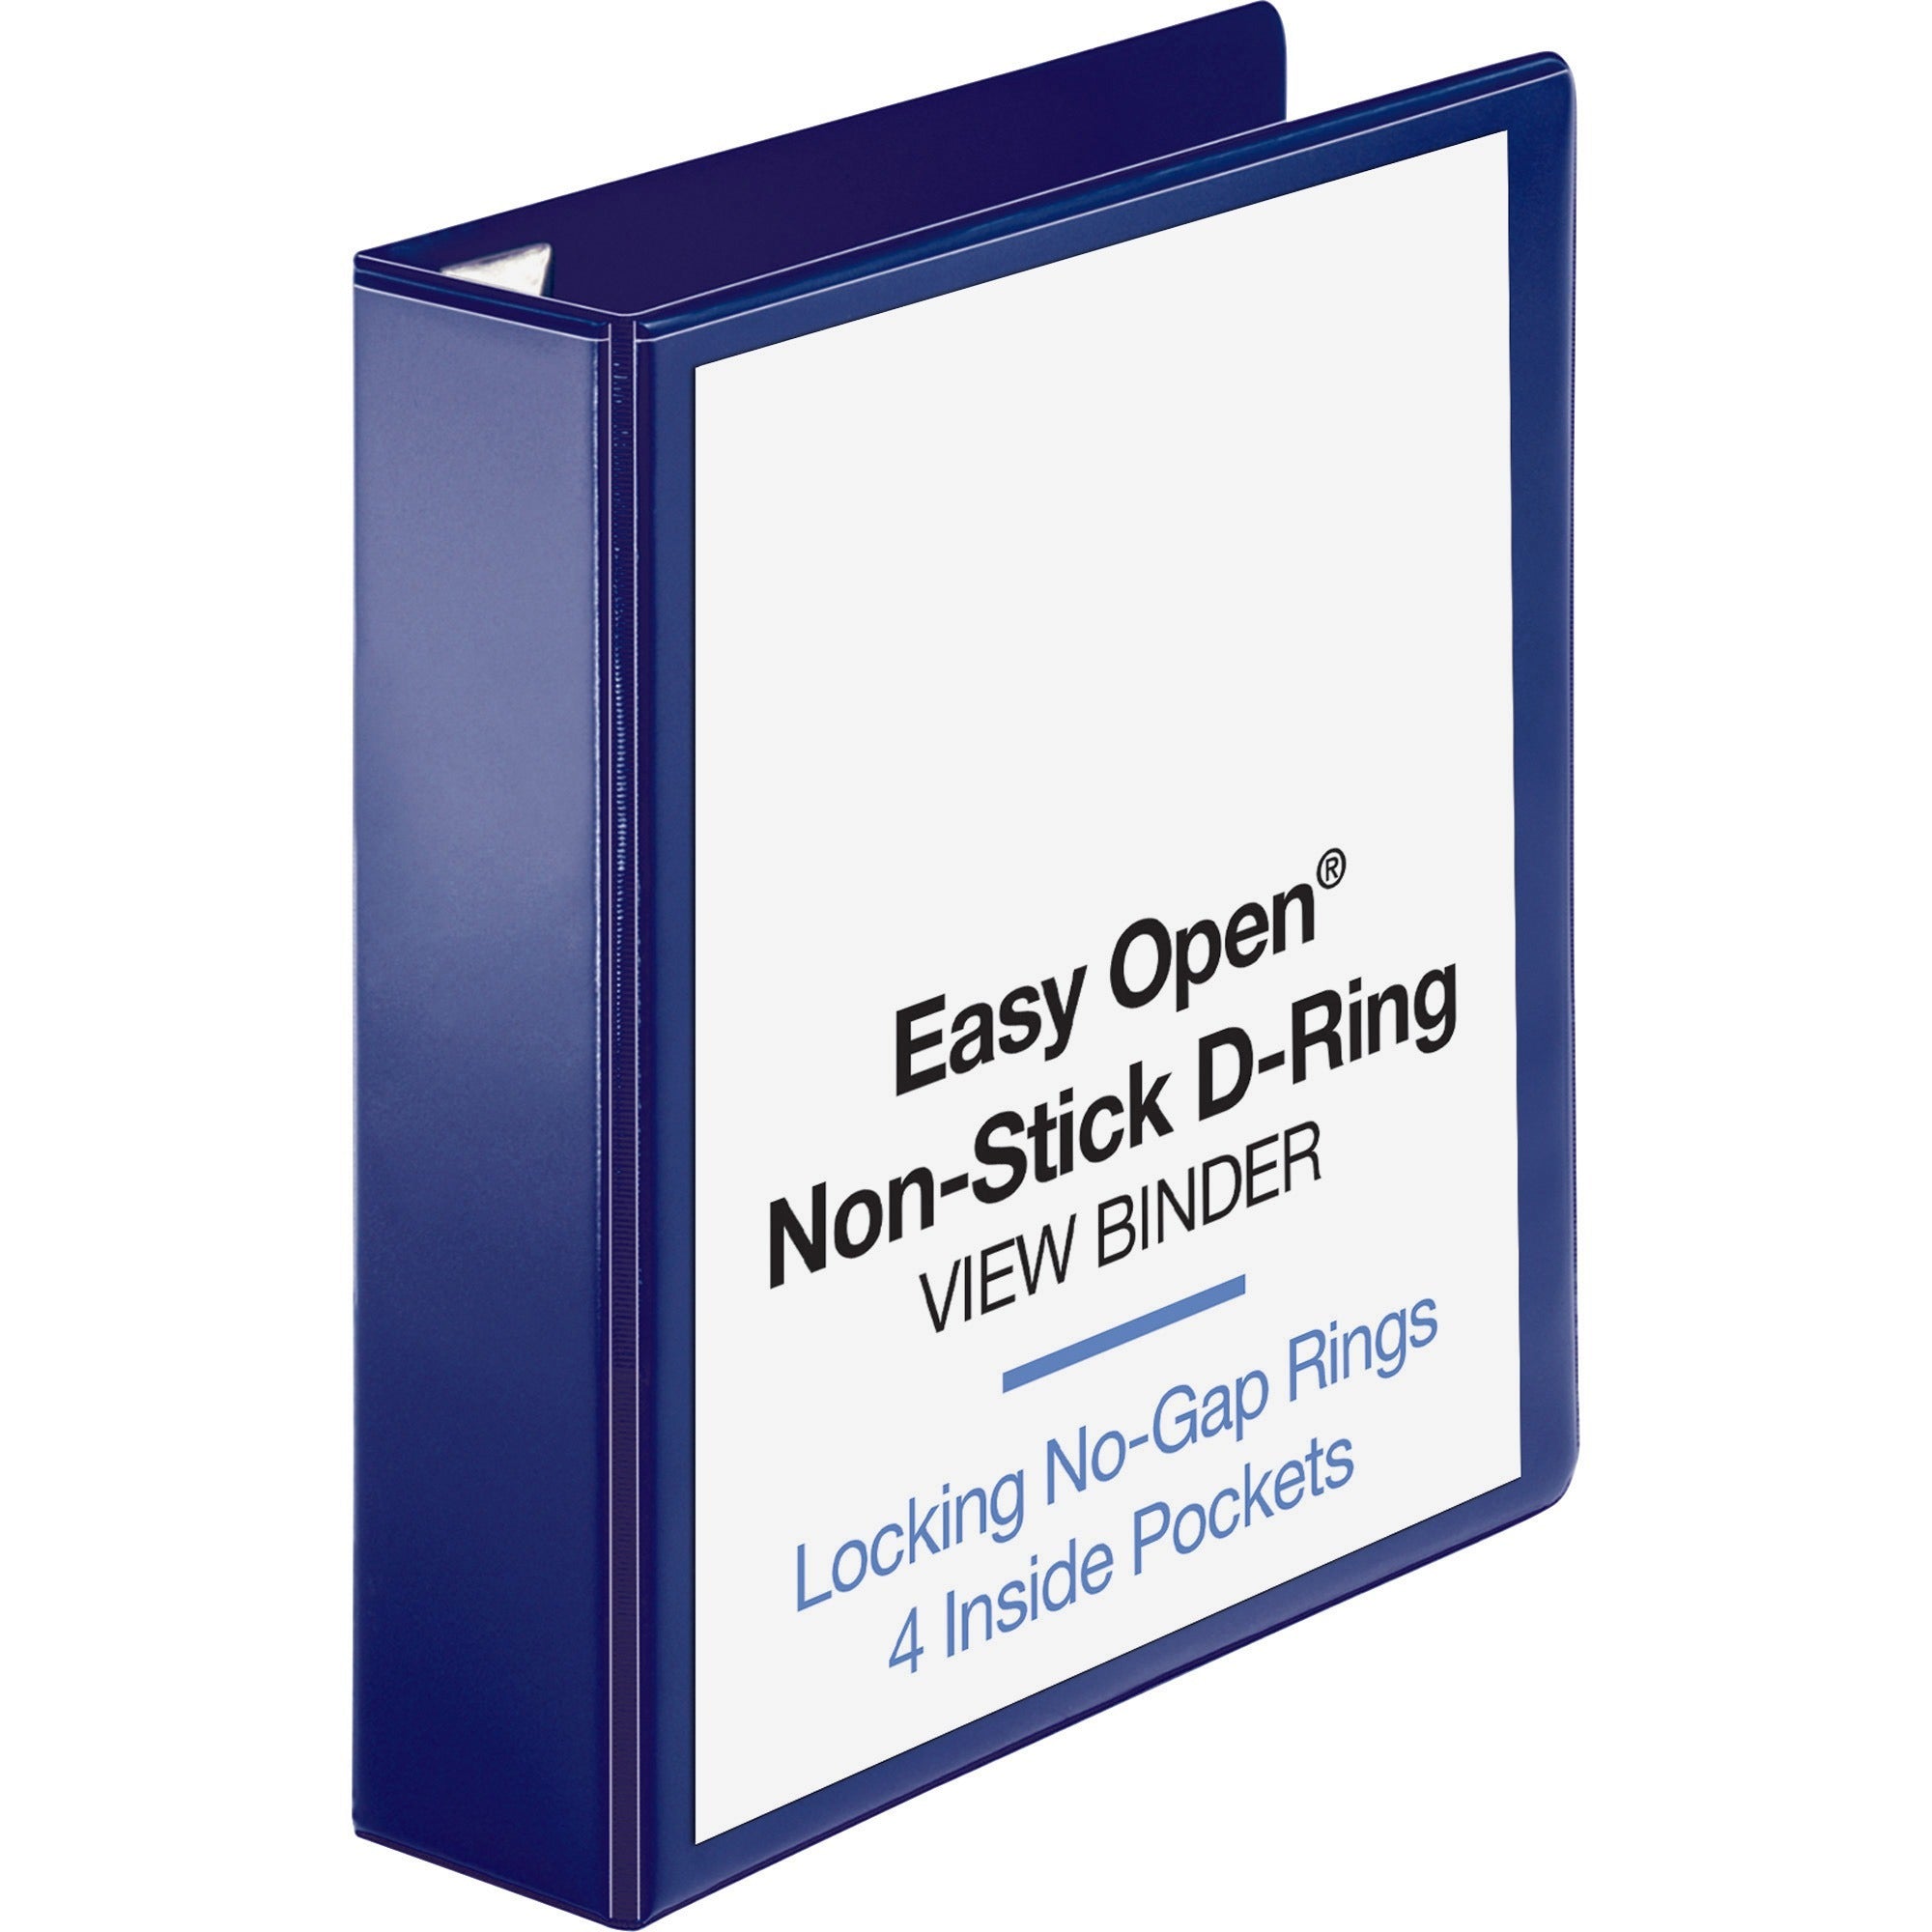 business-source-easy-open-nonstick-d-ring-view-binder-2-binder-capacity-letter-8-1-2-x-11-sheet-size-d-ring-fasteners-4-pockets-polypropylene-navy-non-stick-1-each_bsn26975 - 1